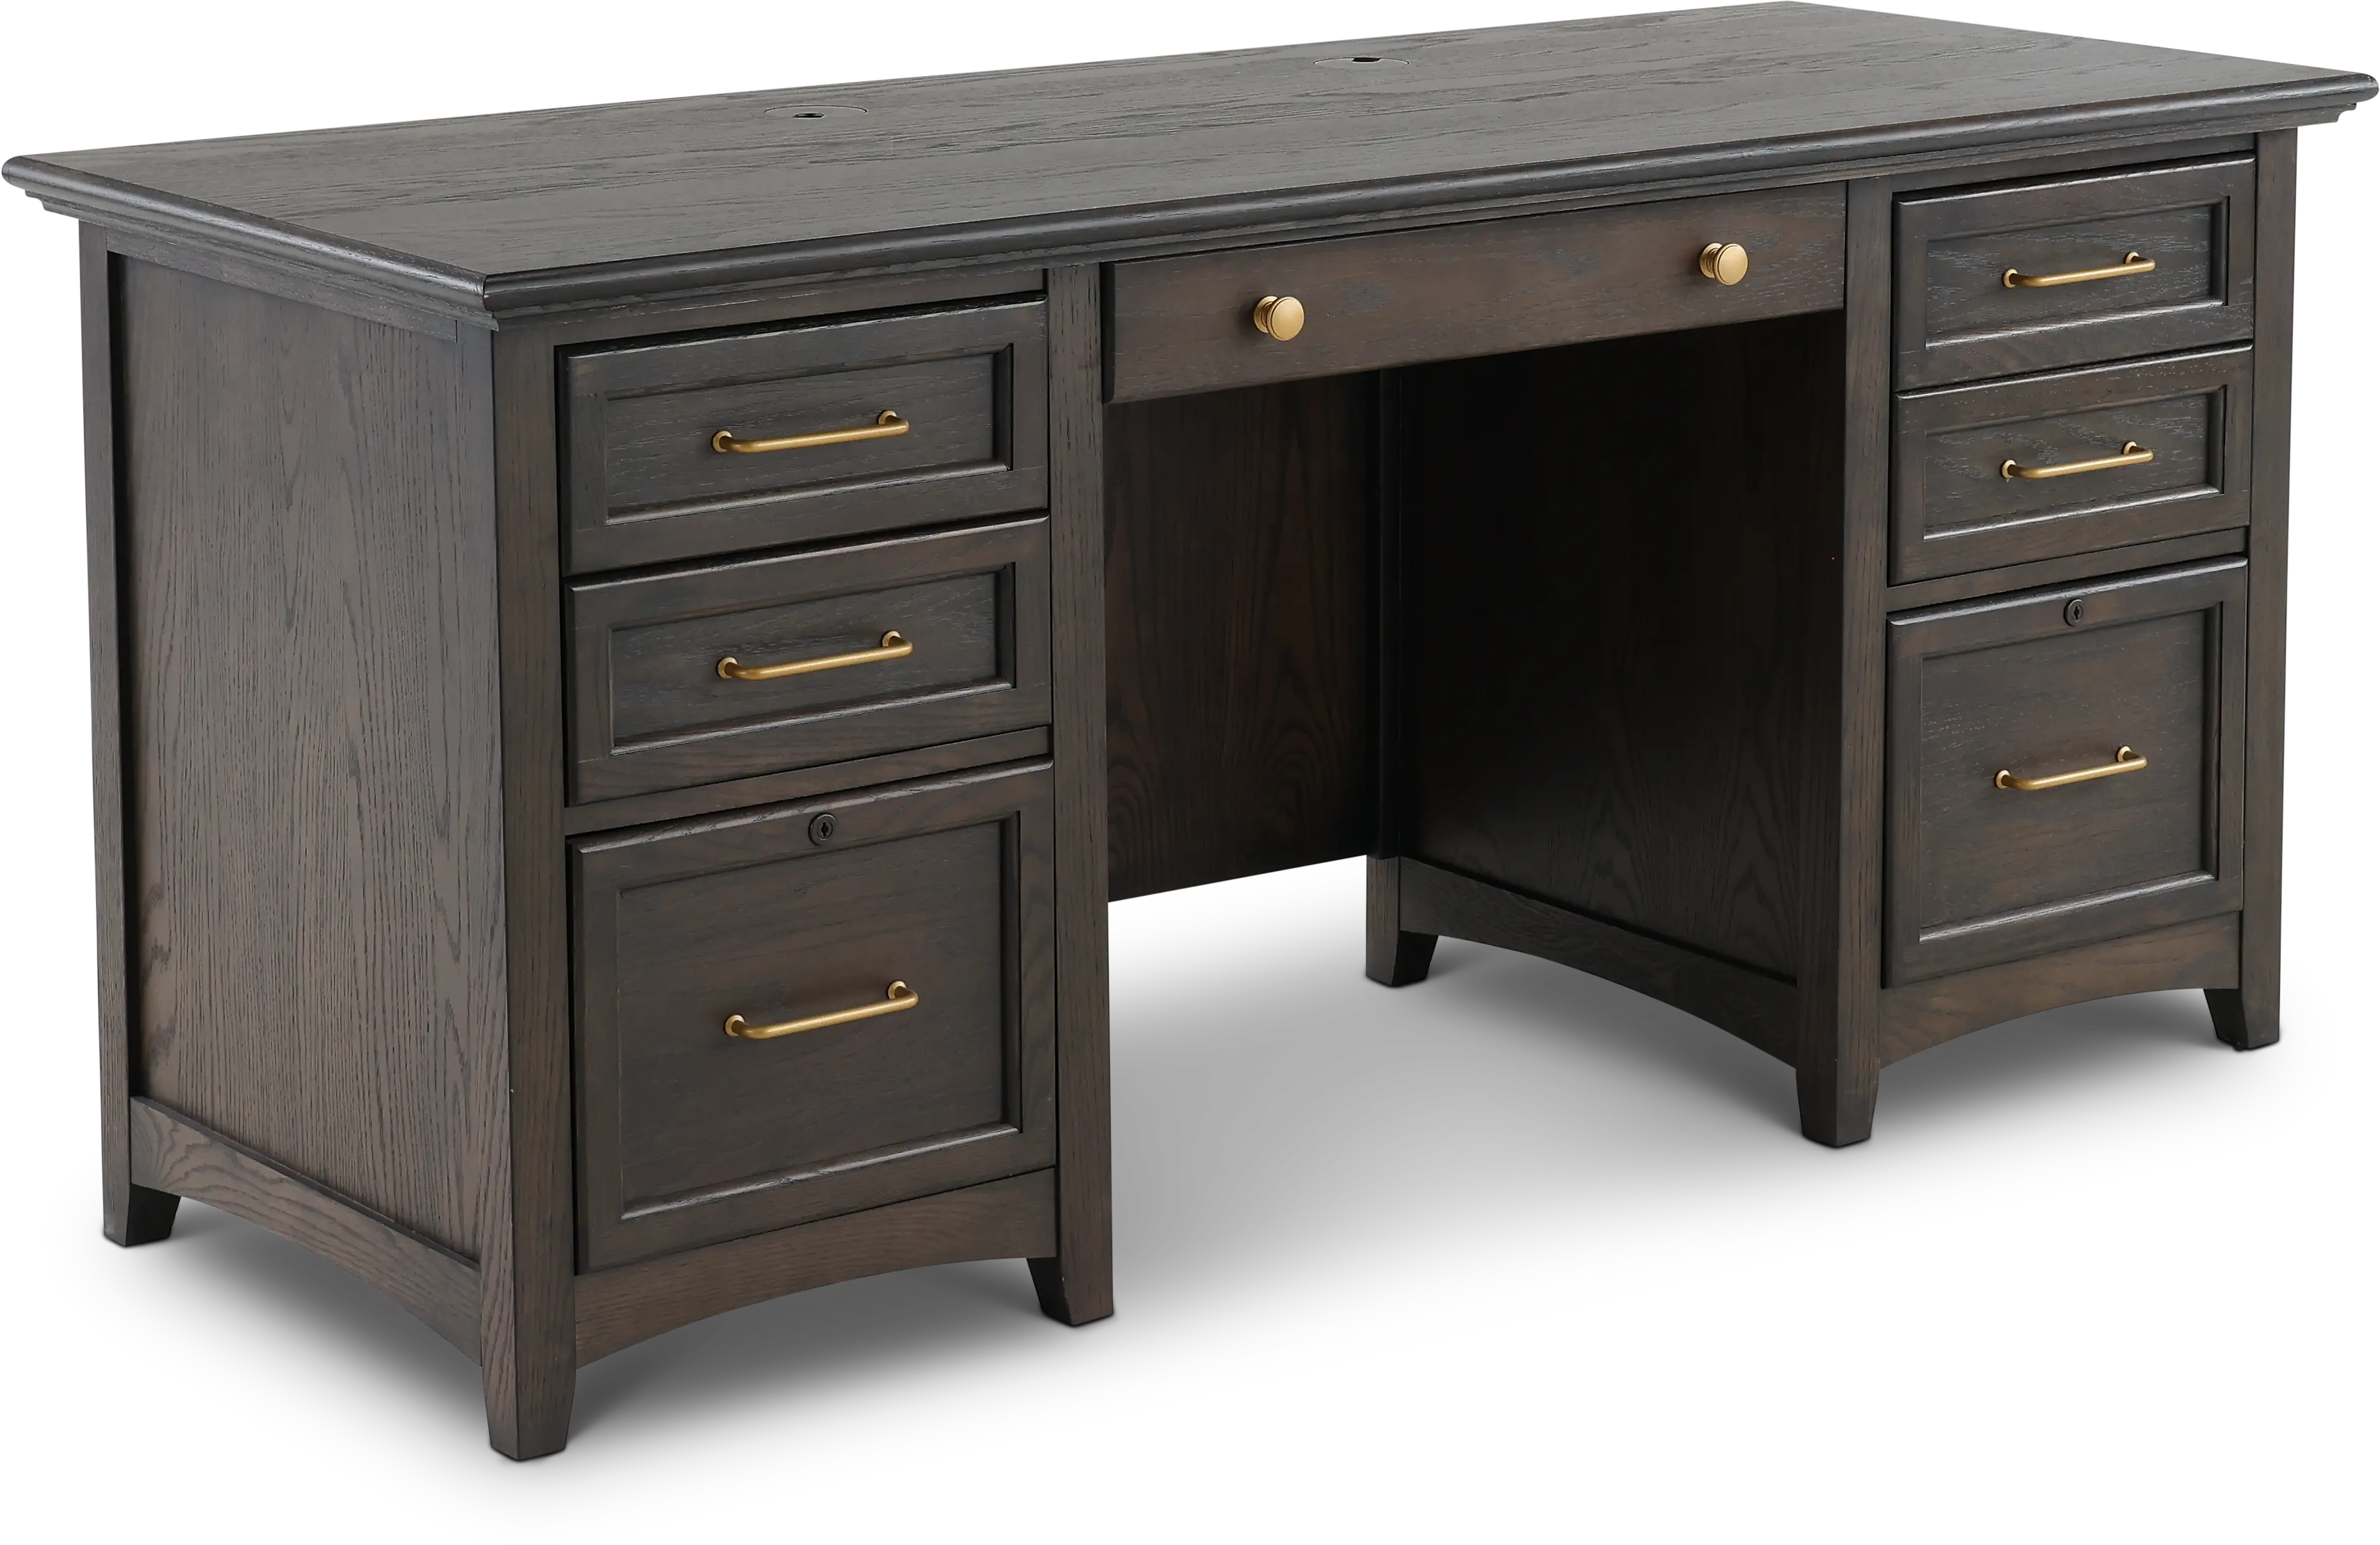 https://static.rcwilley.com/products/112146619/Addison-Gray-66-Inch-Executive-Desk-rcwilley-image1.webp